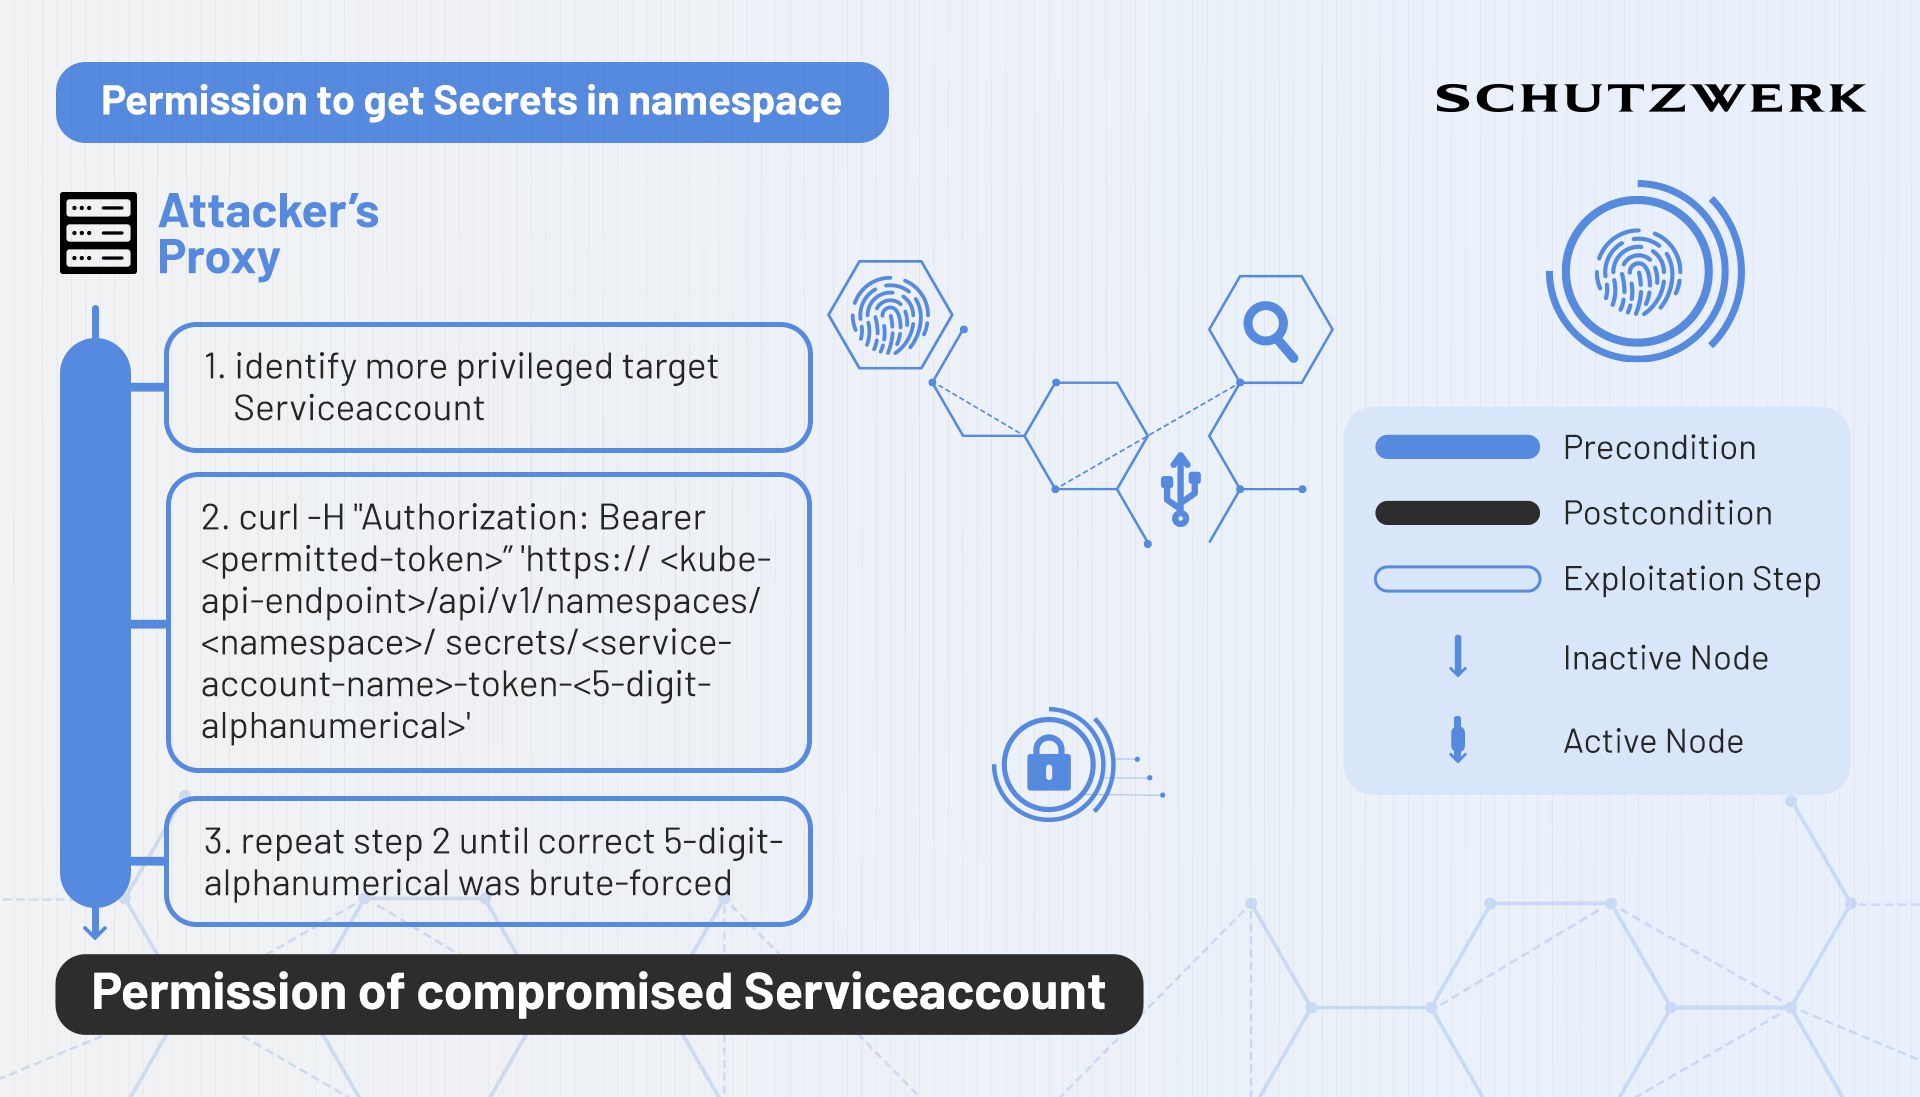 Brute-forcing a Serviceaccounts' corresponding Secret name to obtain its privileges.